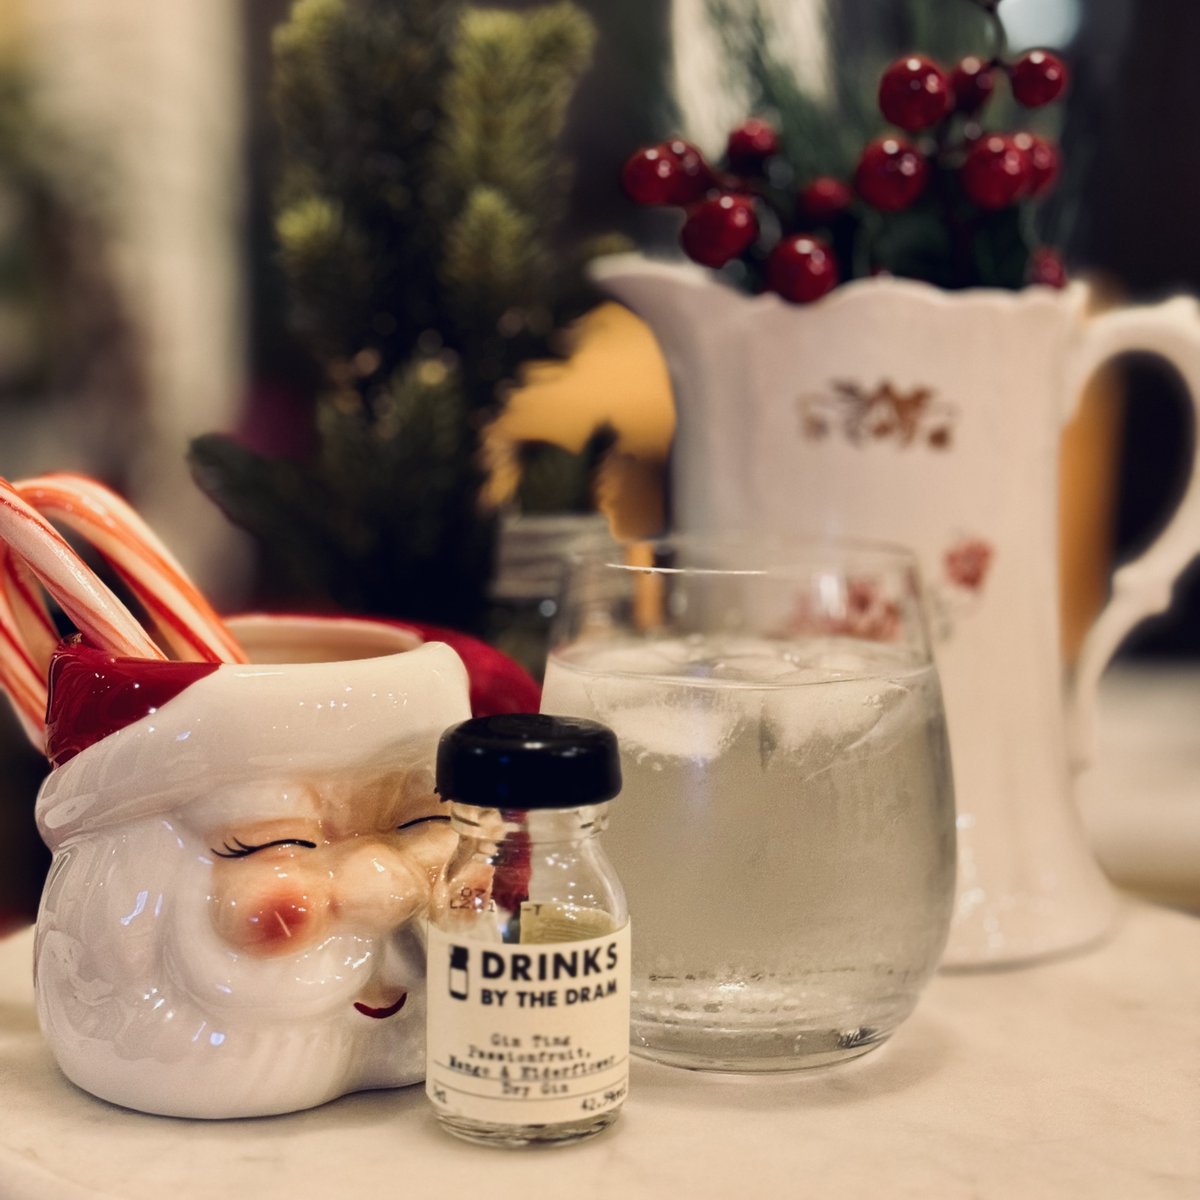 @SuntoryGlobal @Kyrodistillery @FeverTreeMixers @No3Gin @Edinburgh_Gin @greenroomgin A delayed Day 24 of #ginvent and the last gin: GinTing by @GinTing_RumTing

Last gin from the advent calendar! I was wary of this gin because it was supposed to have a passionfruit, mango, and elderflower flavor, but it was actually very good in a G&T. The flavors are subtle but